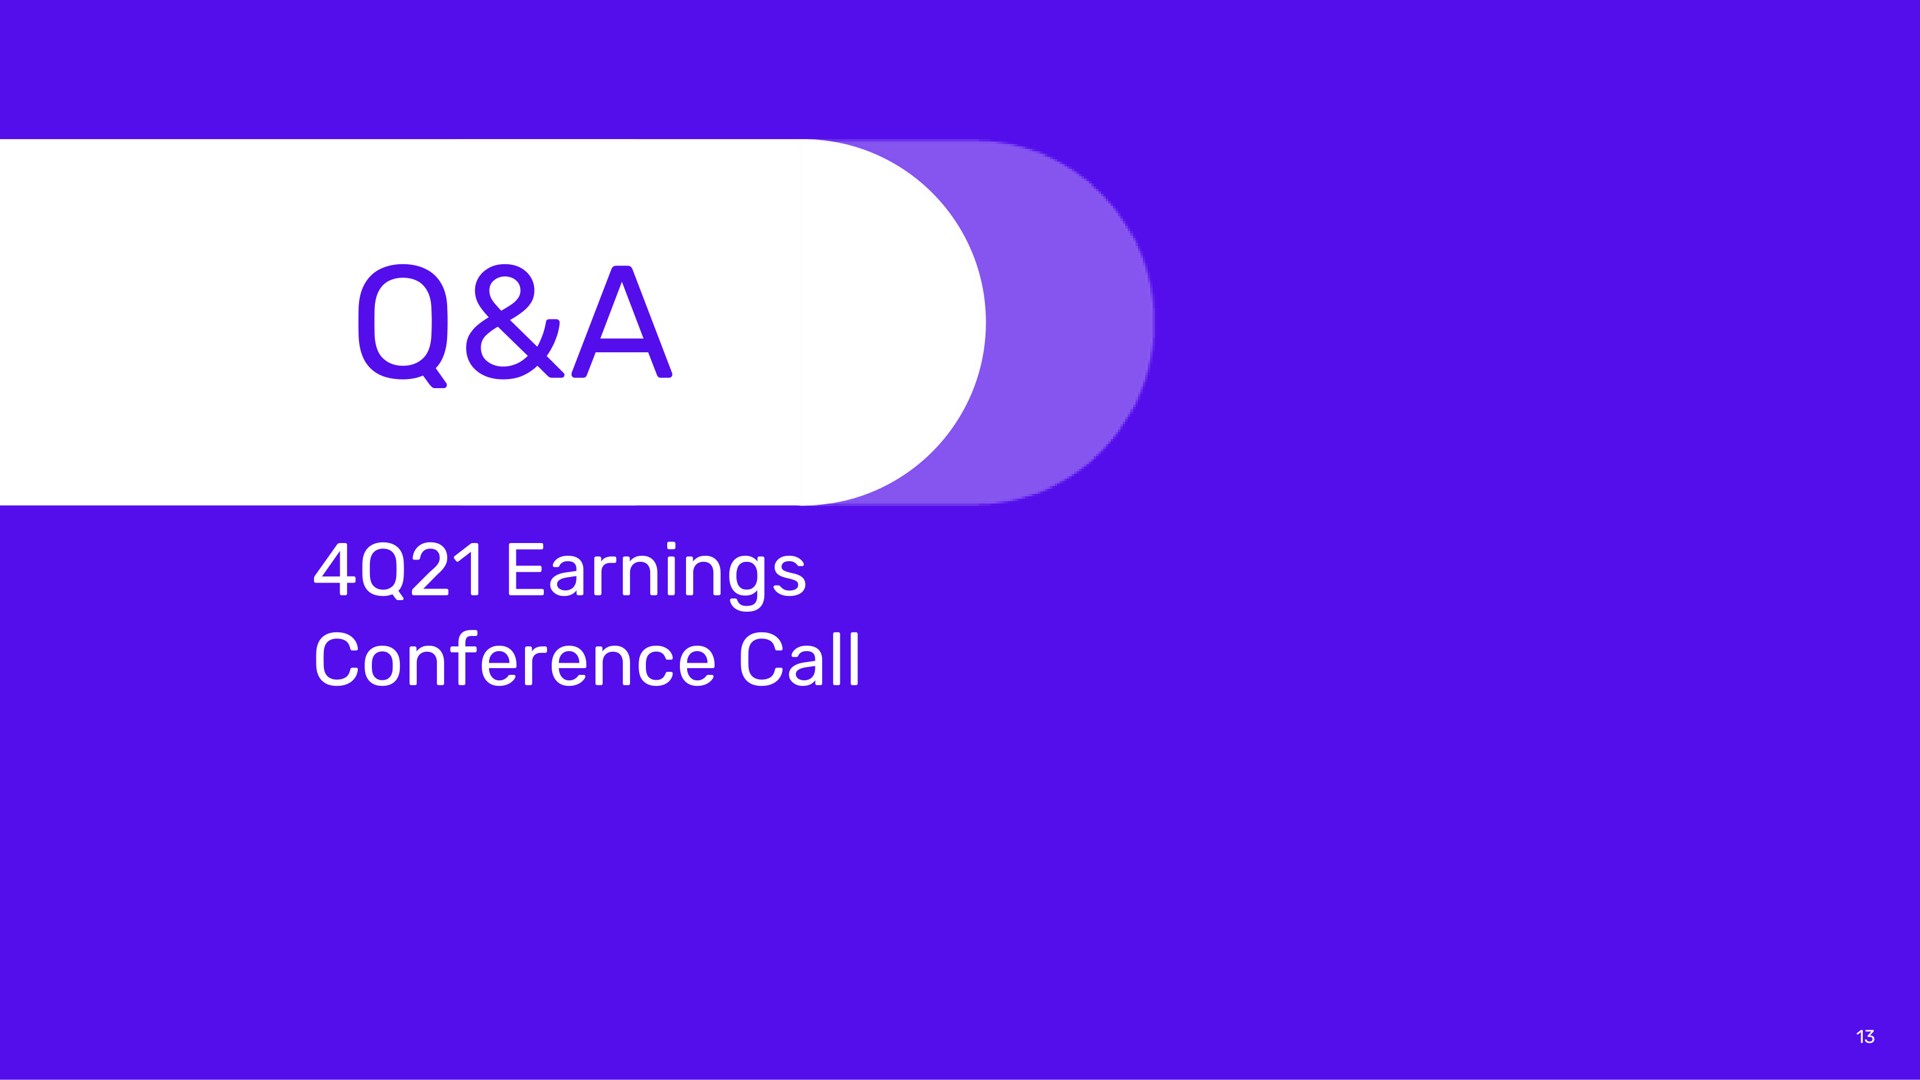 a earnings conference call | Despegar